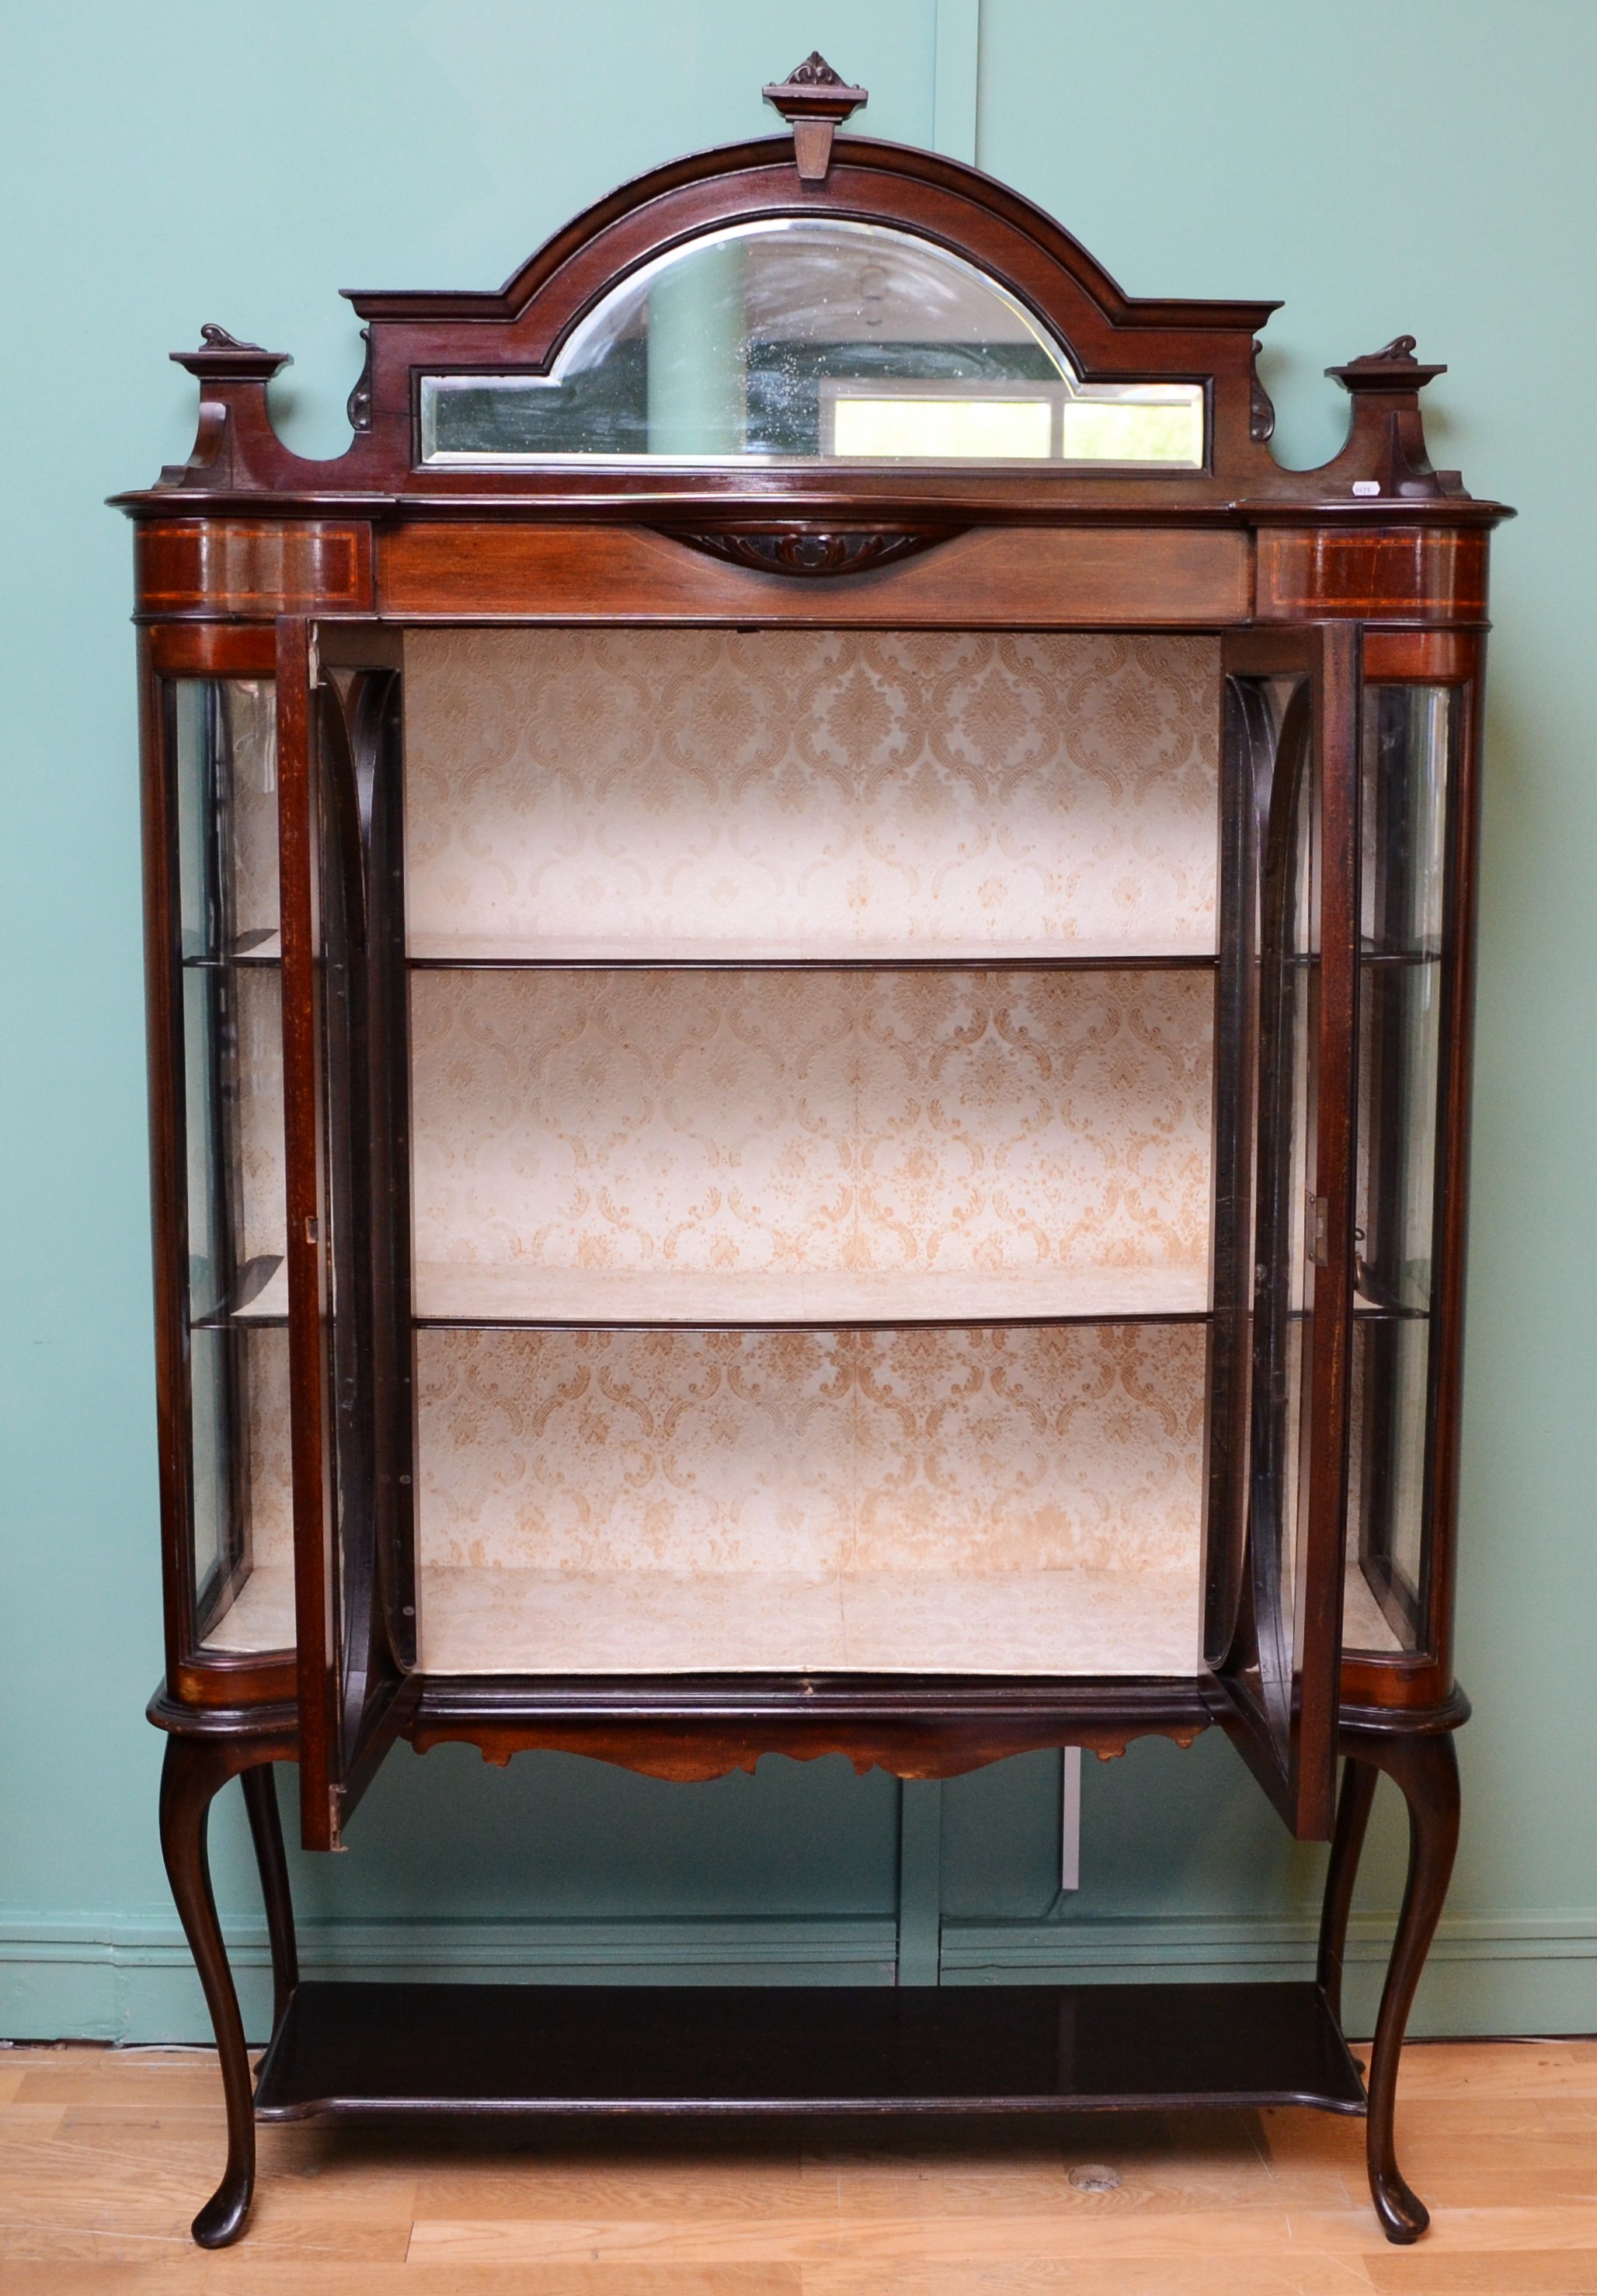 Edwardian inlaid mahogany display cabinet, the central arched mirror plate within a carved scroll - Image 5 of 5